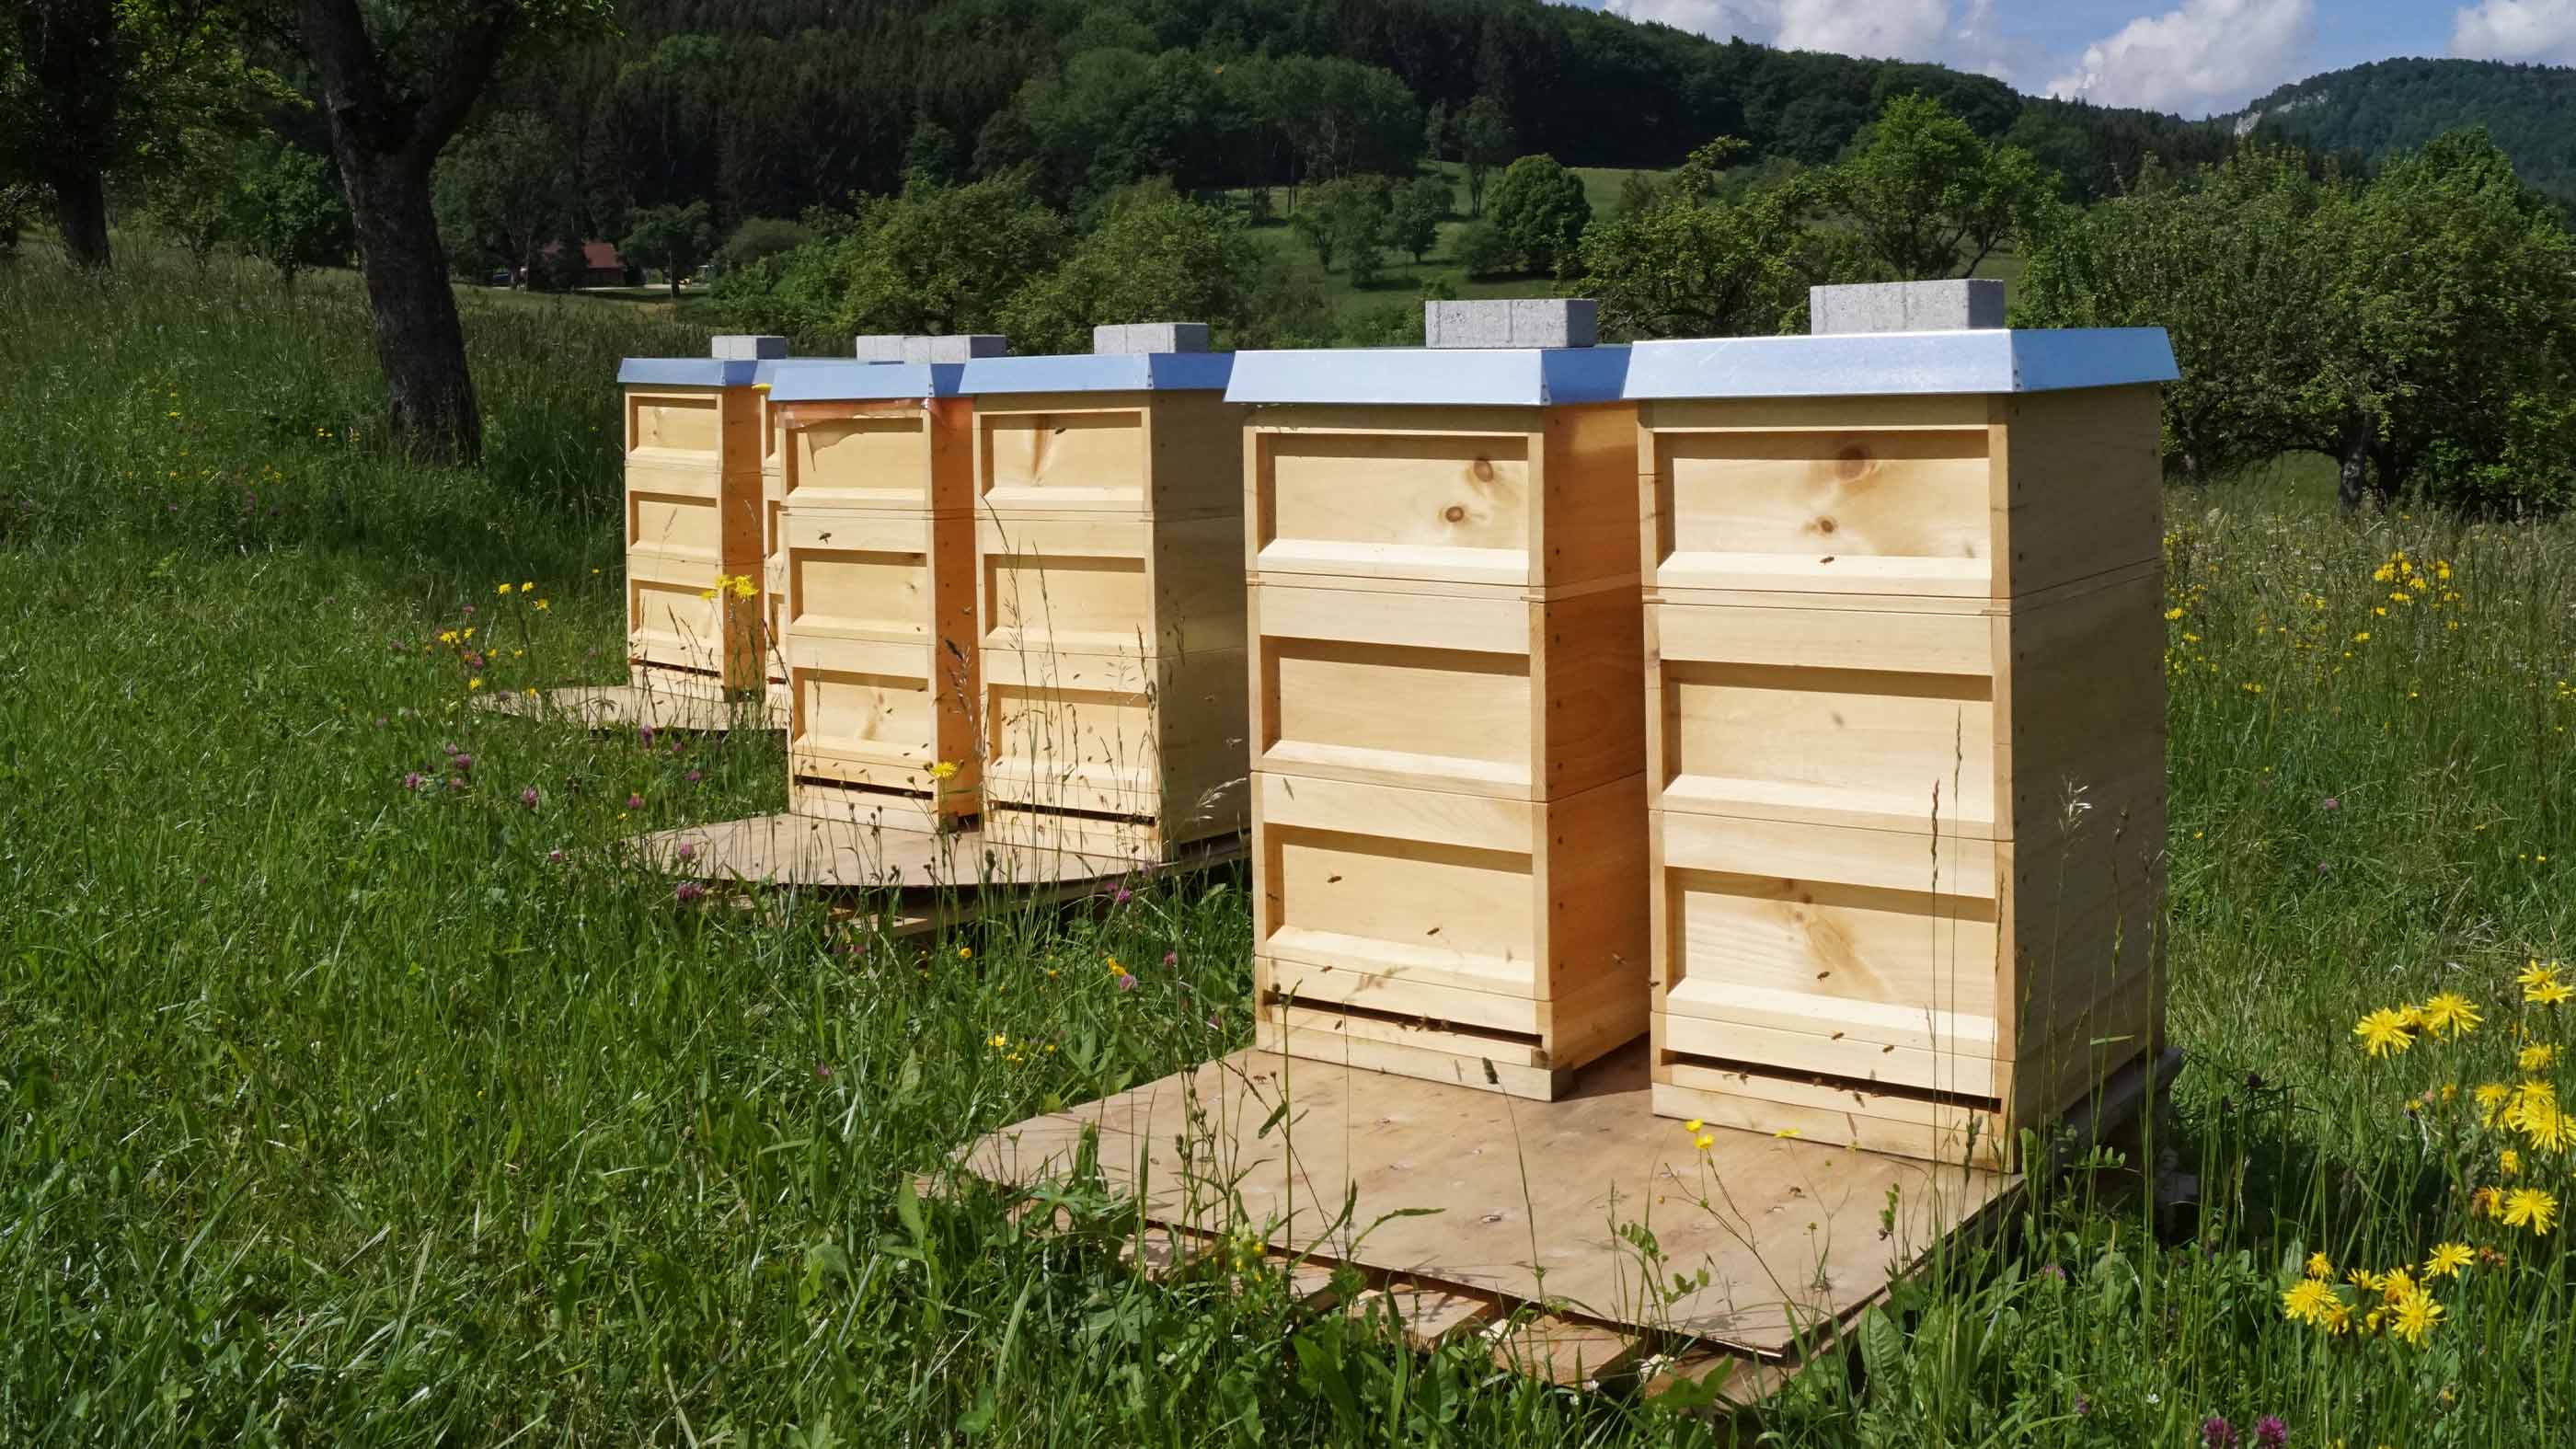 The six beehives at mey are lined up in pairs on the meadow in Lautlingen, Germany | mey®